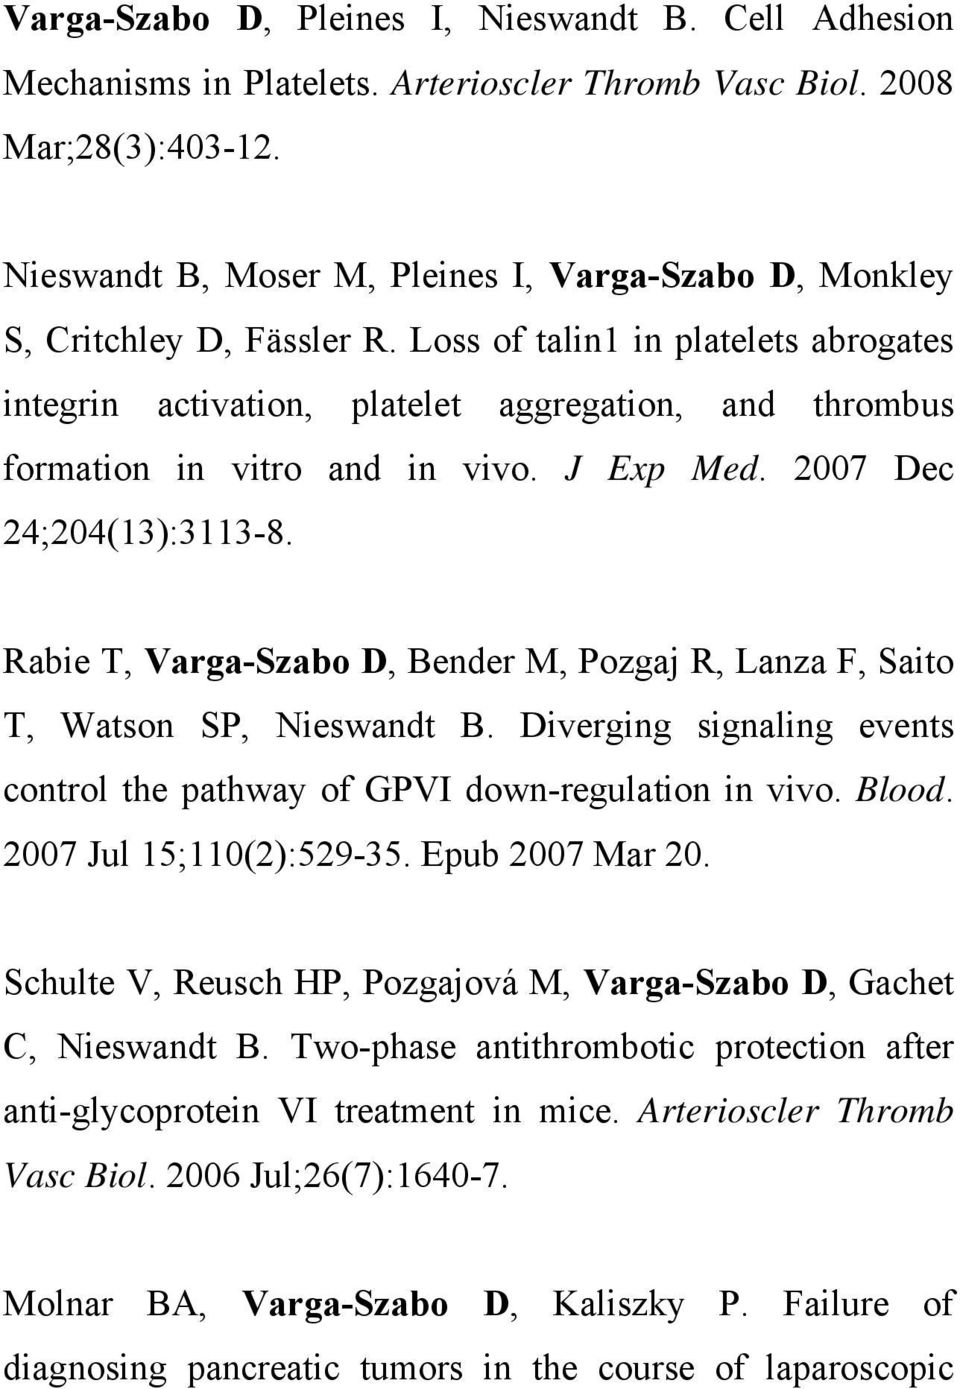 Loss of talin1 in platelets abrogates integrin activation, platelet aggregation, and thrombus formation in vitro and in vivo. J Exp Med. 2007 Dec 24;204(13):3113-8.